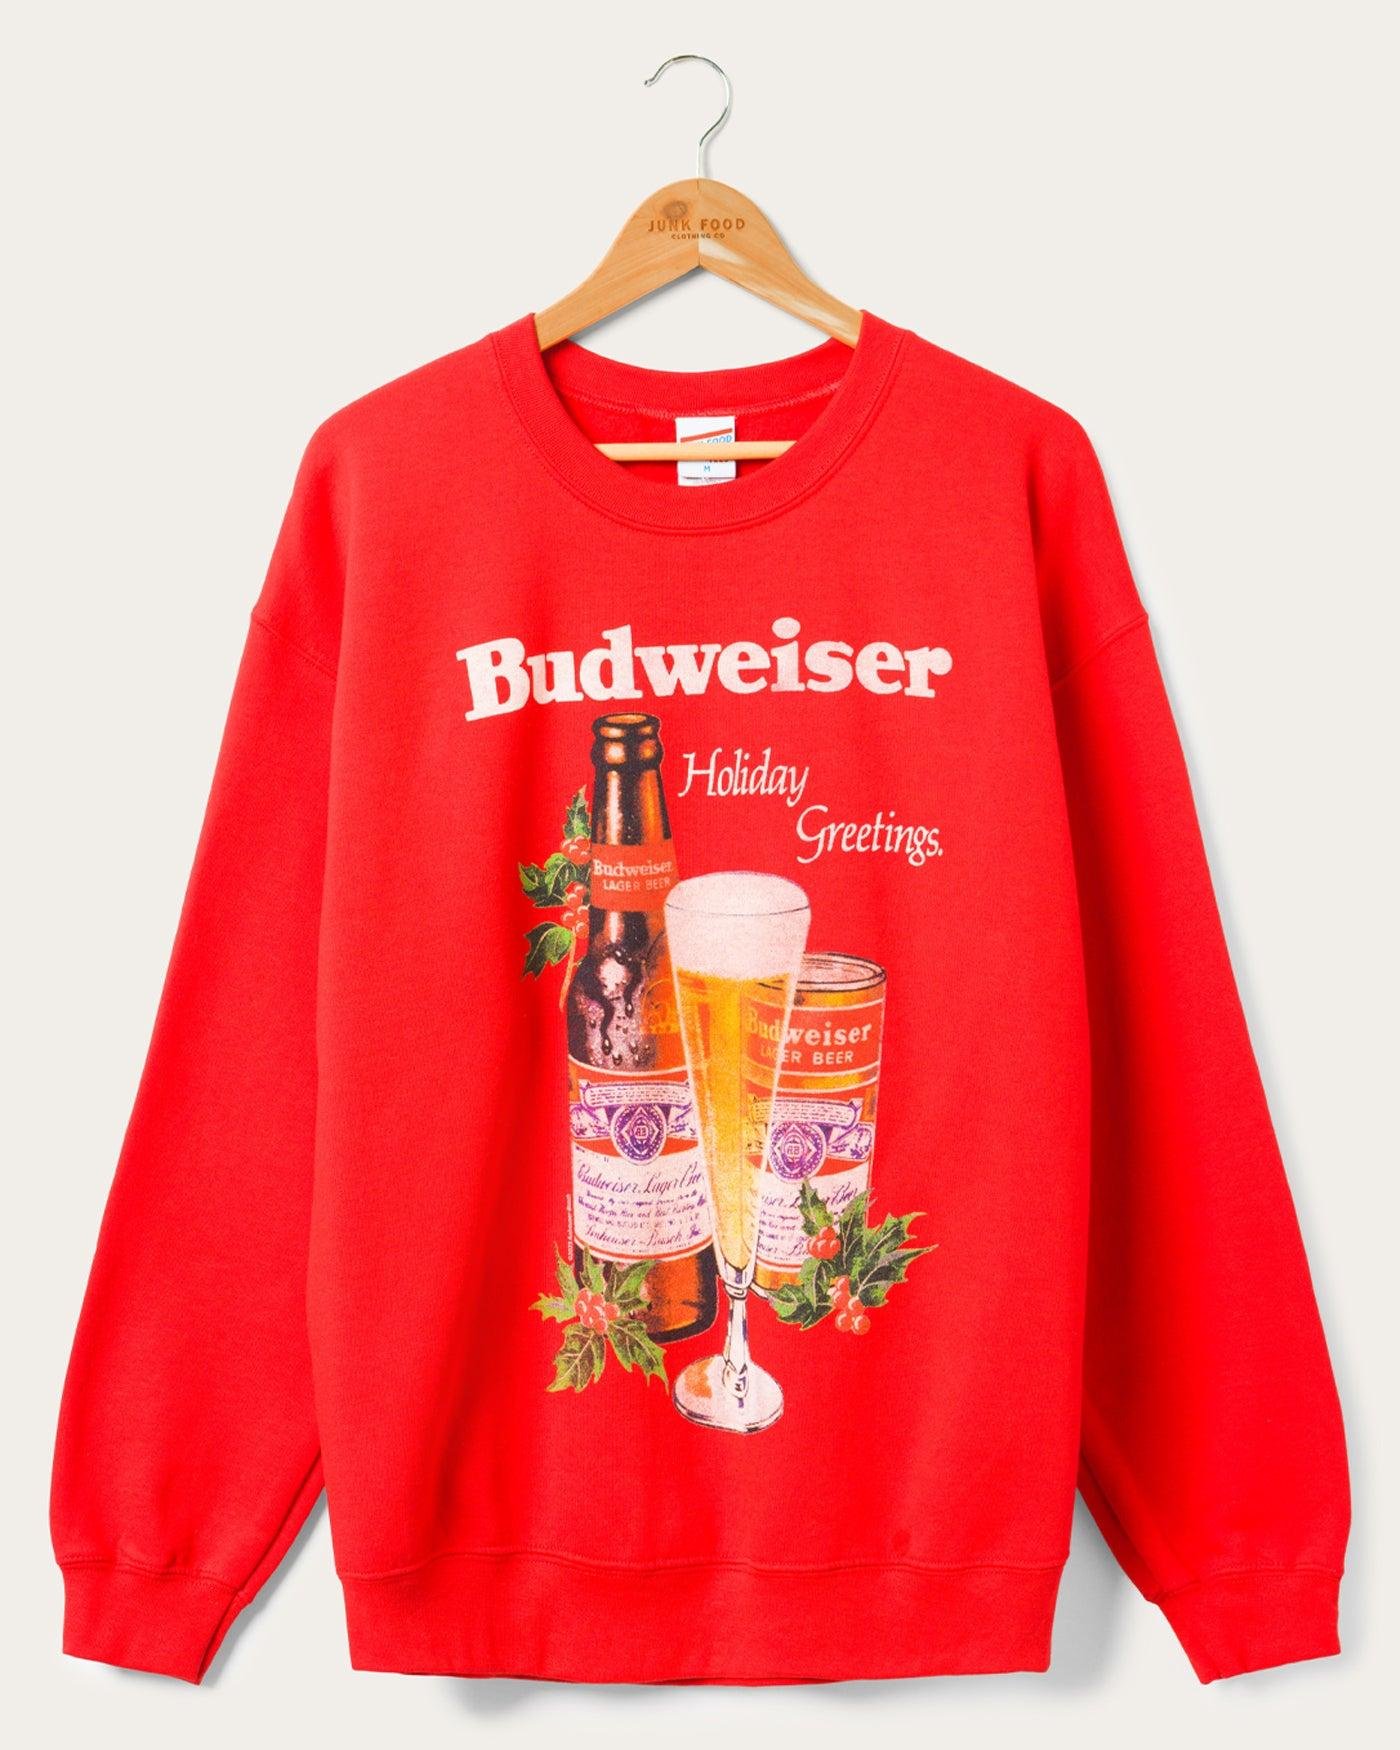 Junk Food Clothing Budweiser Holiday Greetings Flea Market Fleece Pullover by JUNK FOOD CLOTHING